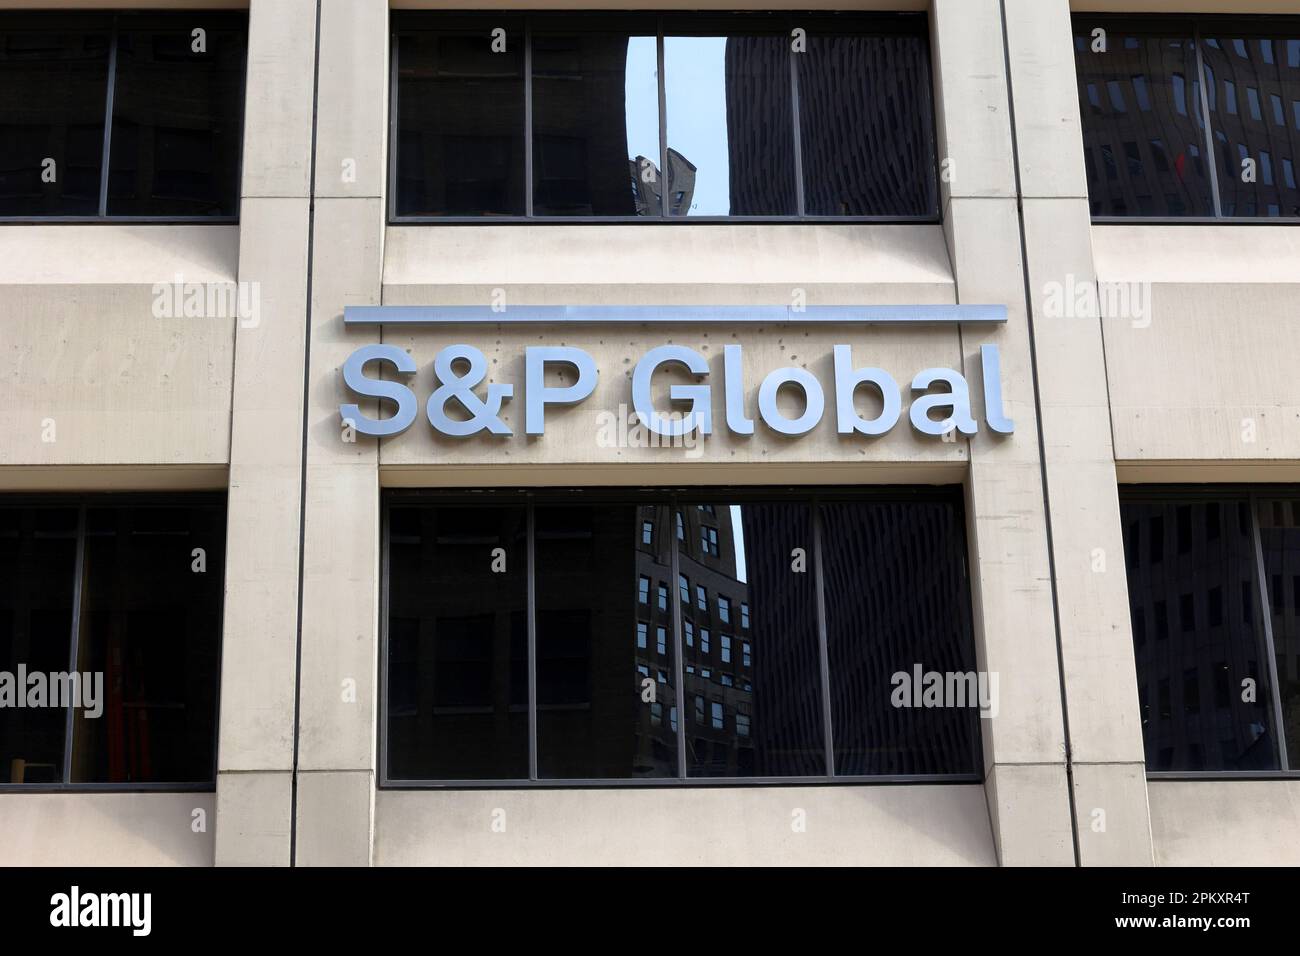 S&P Global, 55 Water St, New York. A financial information and credit rating company formerly known as McGraw Hill Financial. Stock Photo